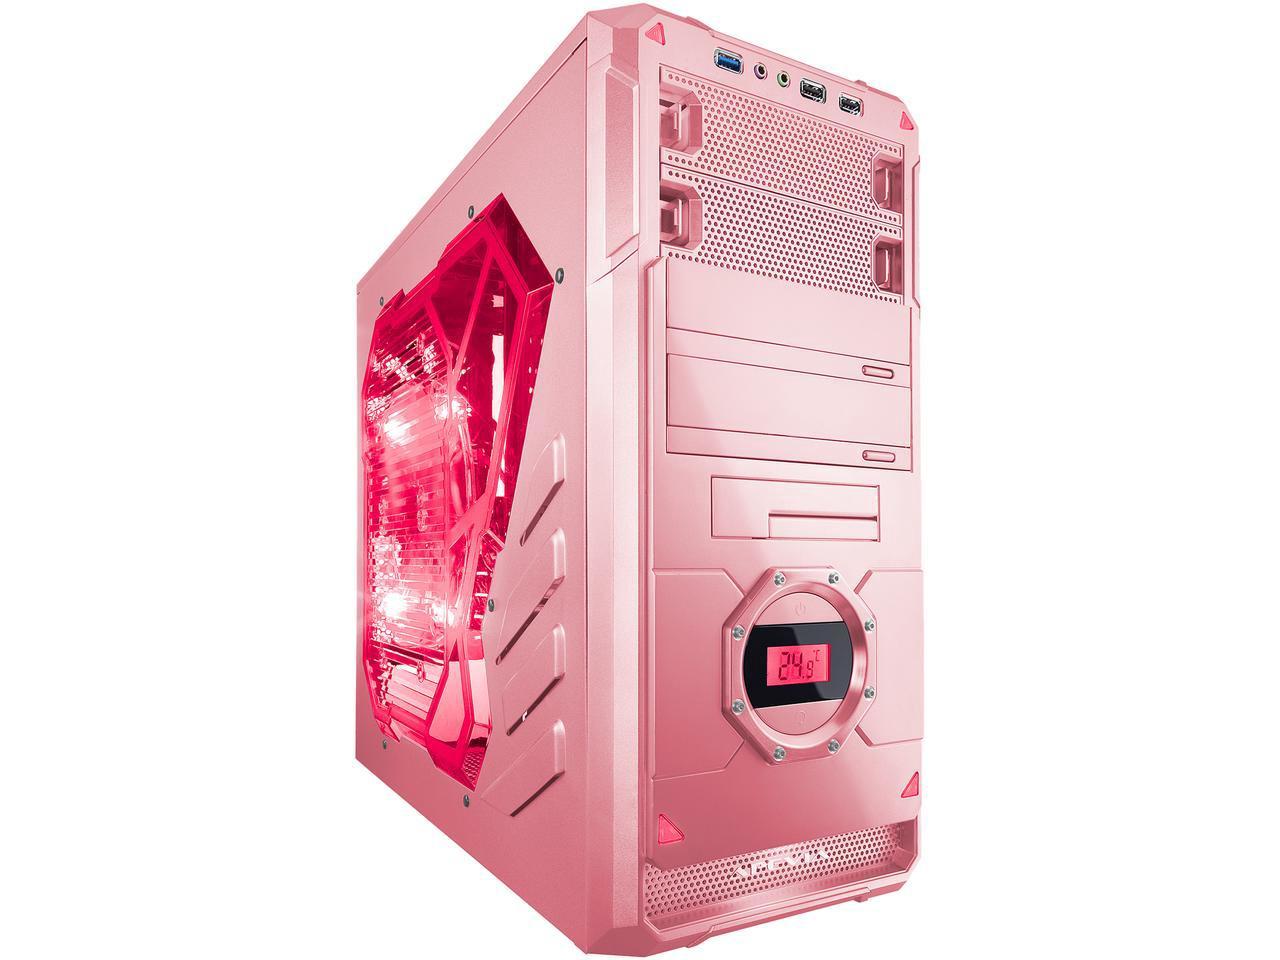 crazy PC cases, pink computer case, girly PC, pink PC, Newegg, APEVIA X-DREAMER4-PK